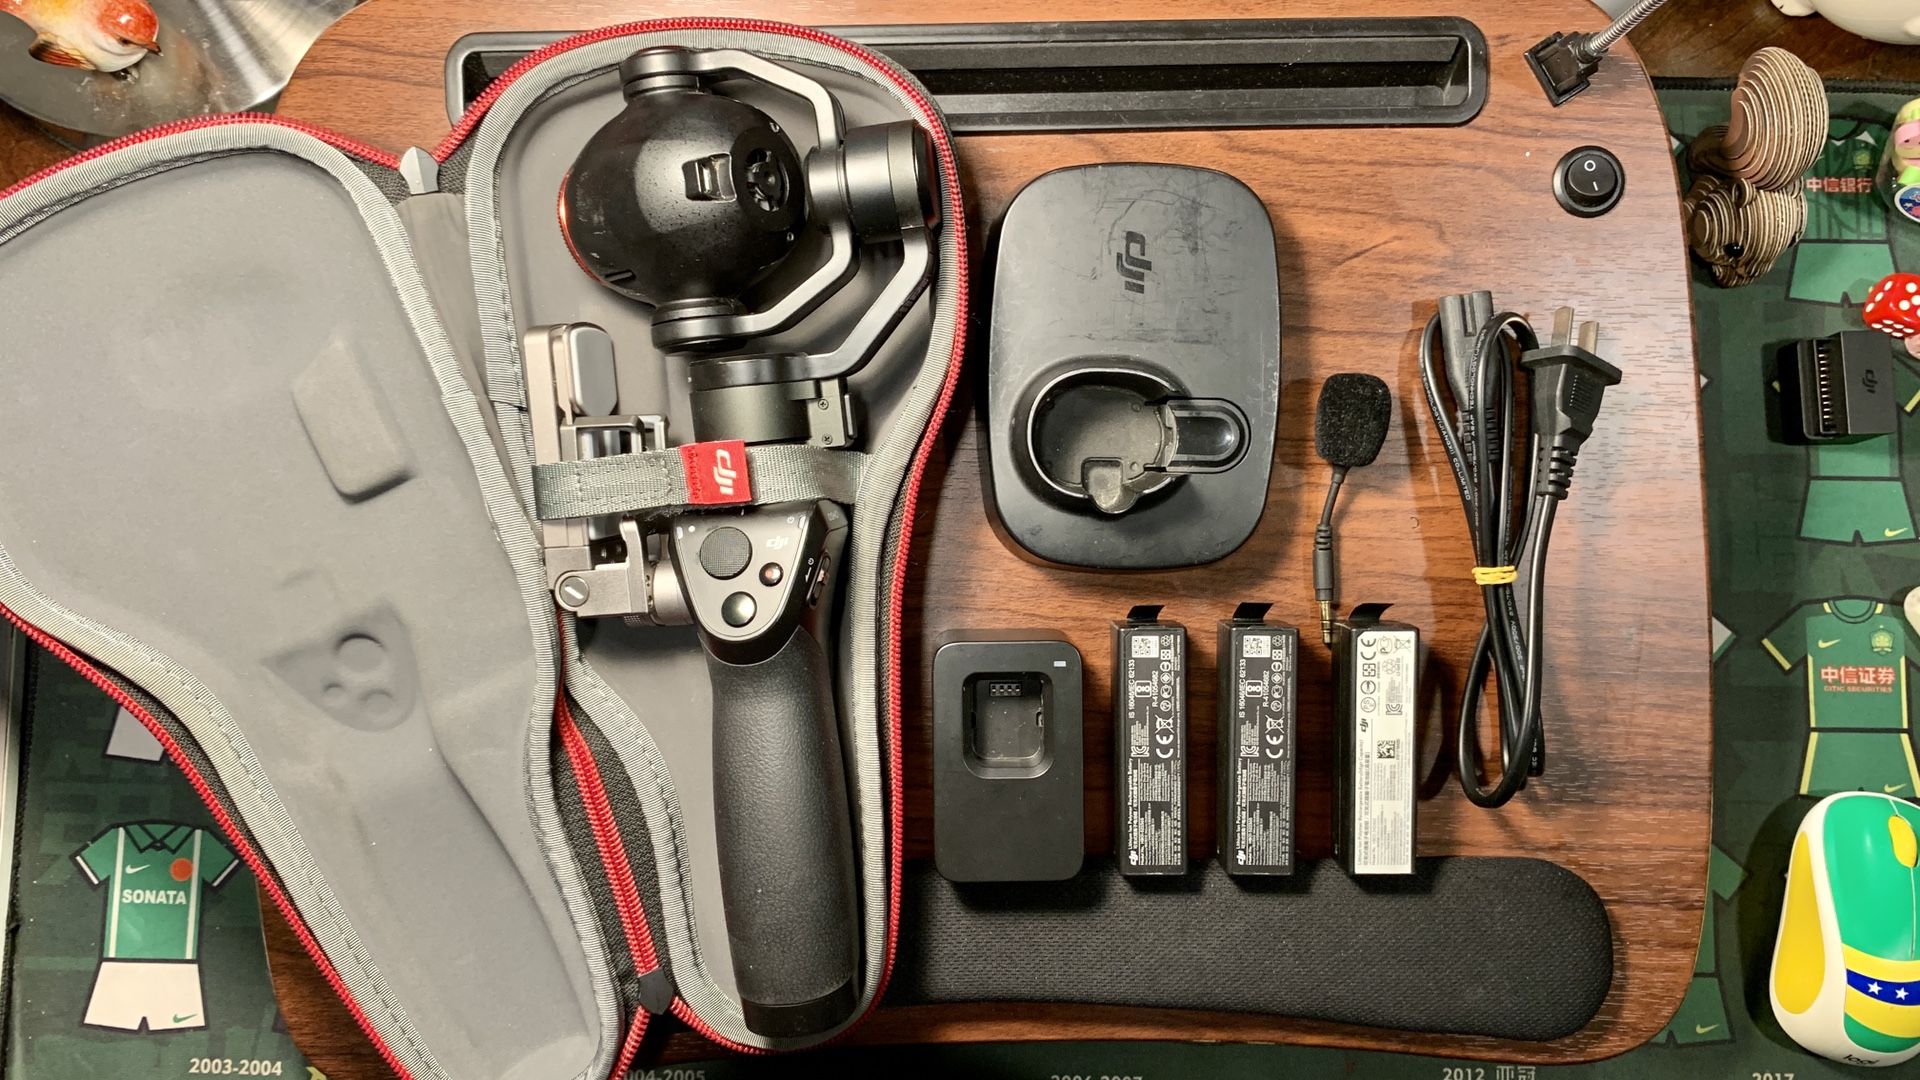 【Uesd】DJI Osmo + with 3 extra batteries and 16G MicroSD card